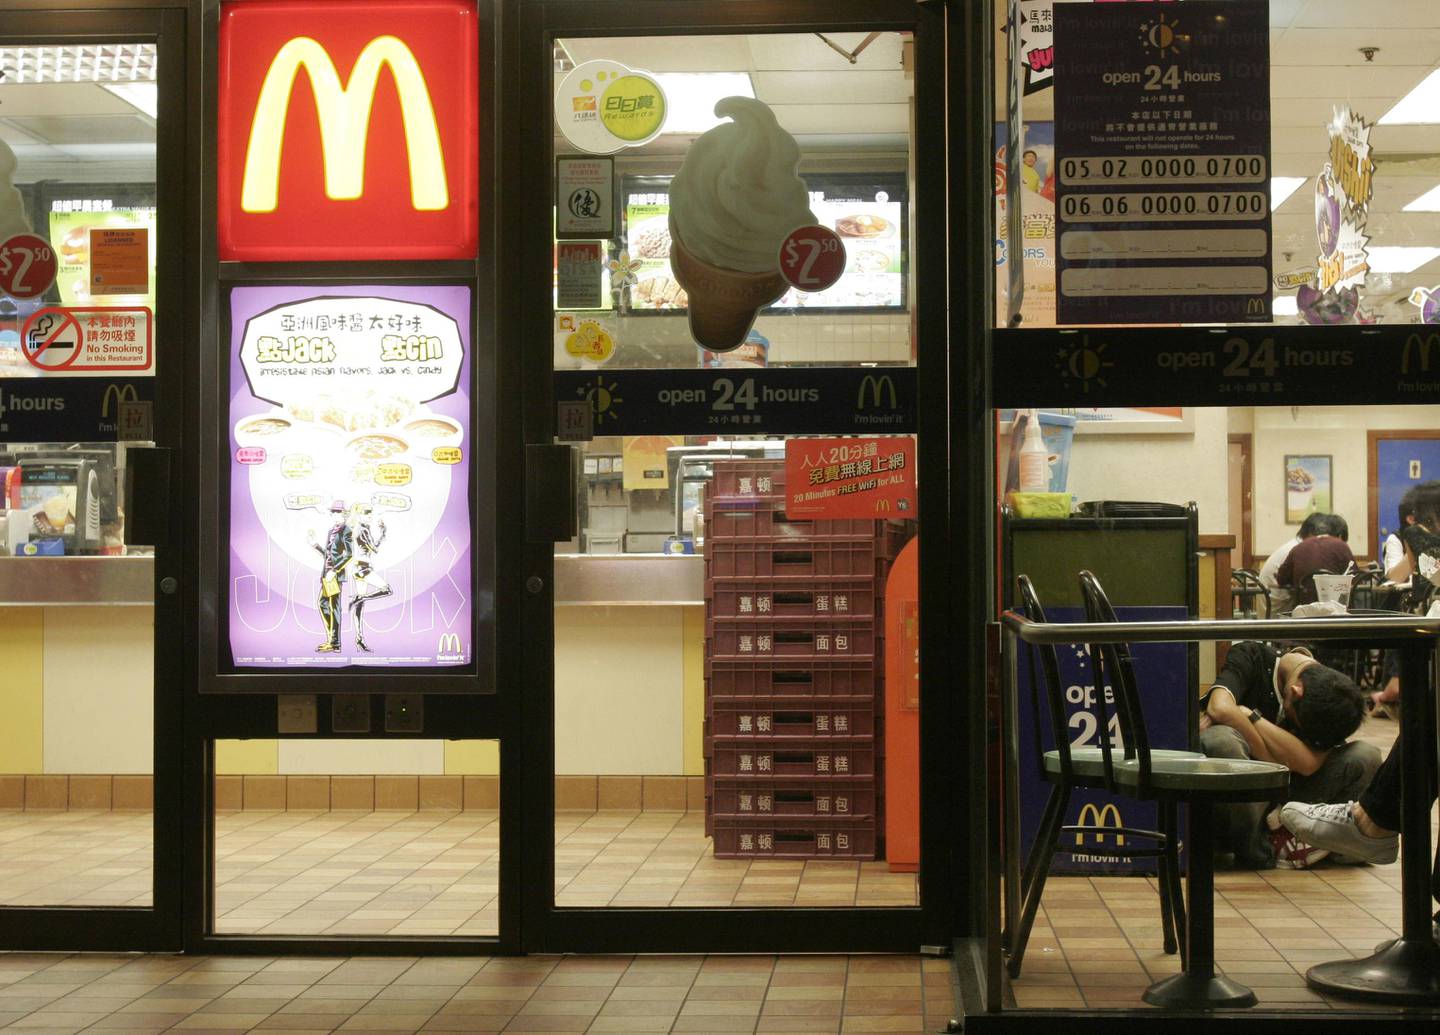 A man rests inside a downtown McDonald's in Hong Kong early Tuesday, May 1, 2007. McDonald's in Hong Kong is no longer just a restaurant for people to munch a burger, it has recently become a shelter for "McRefugees" to crash out. People who cannot afford high rent or want to save a few bucks from overnight transportation have opted to sleep in some of the fast food restaurants which operate around the clock. (AP Photo/Vincent Yu)